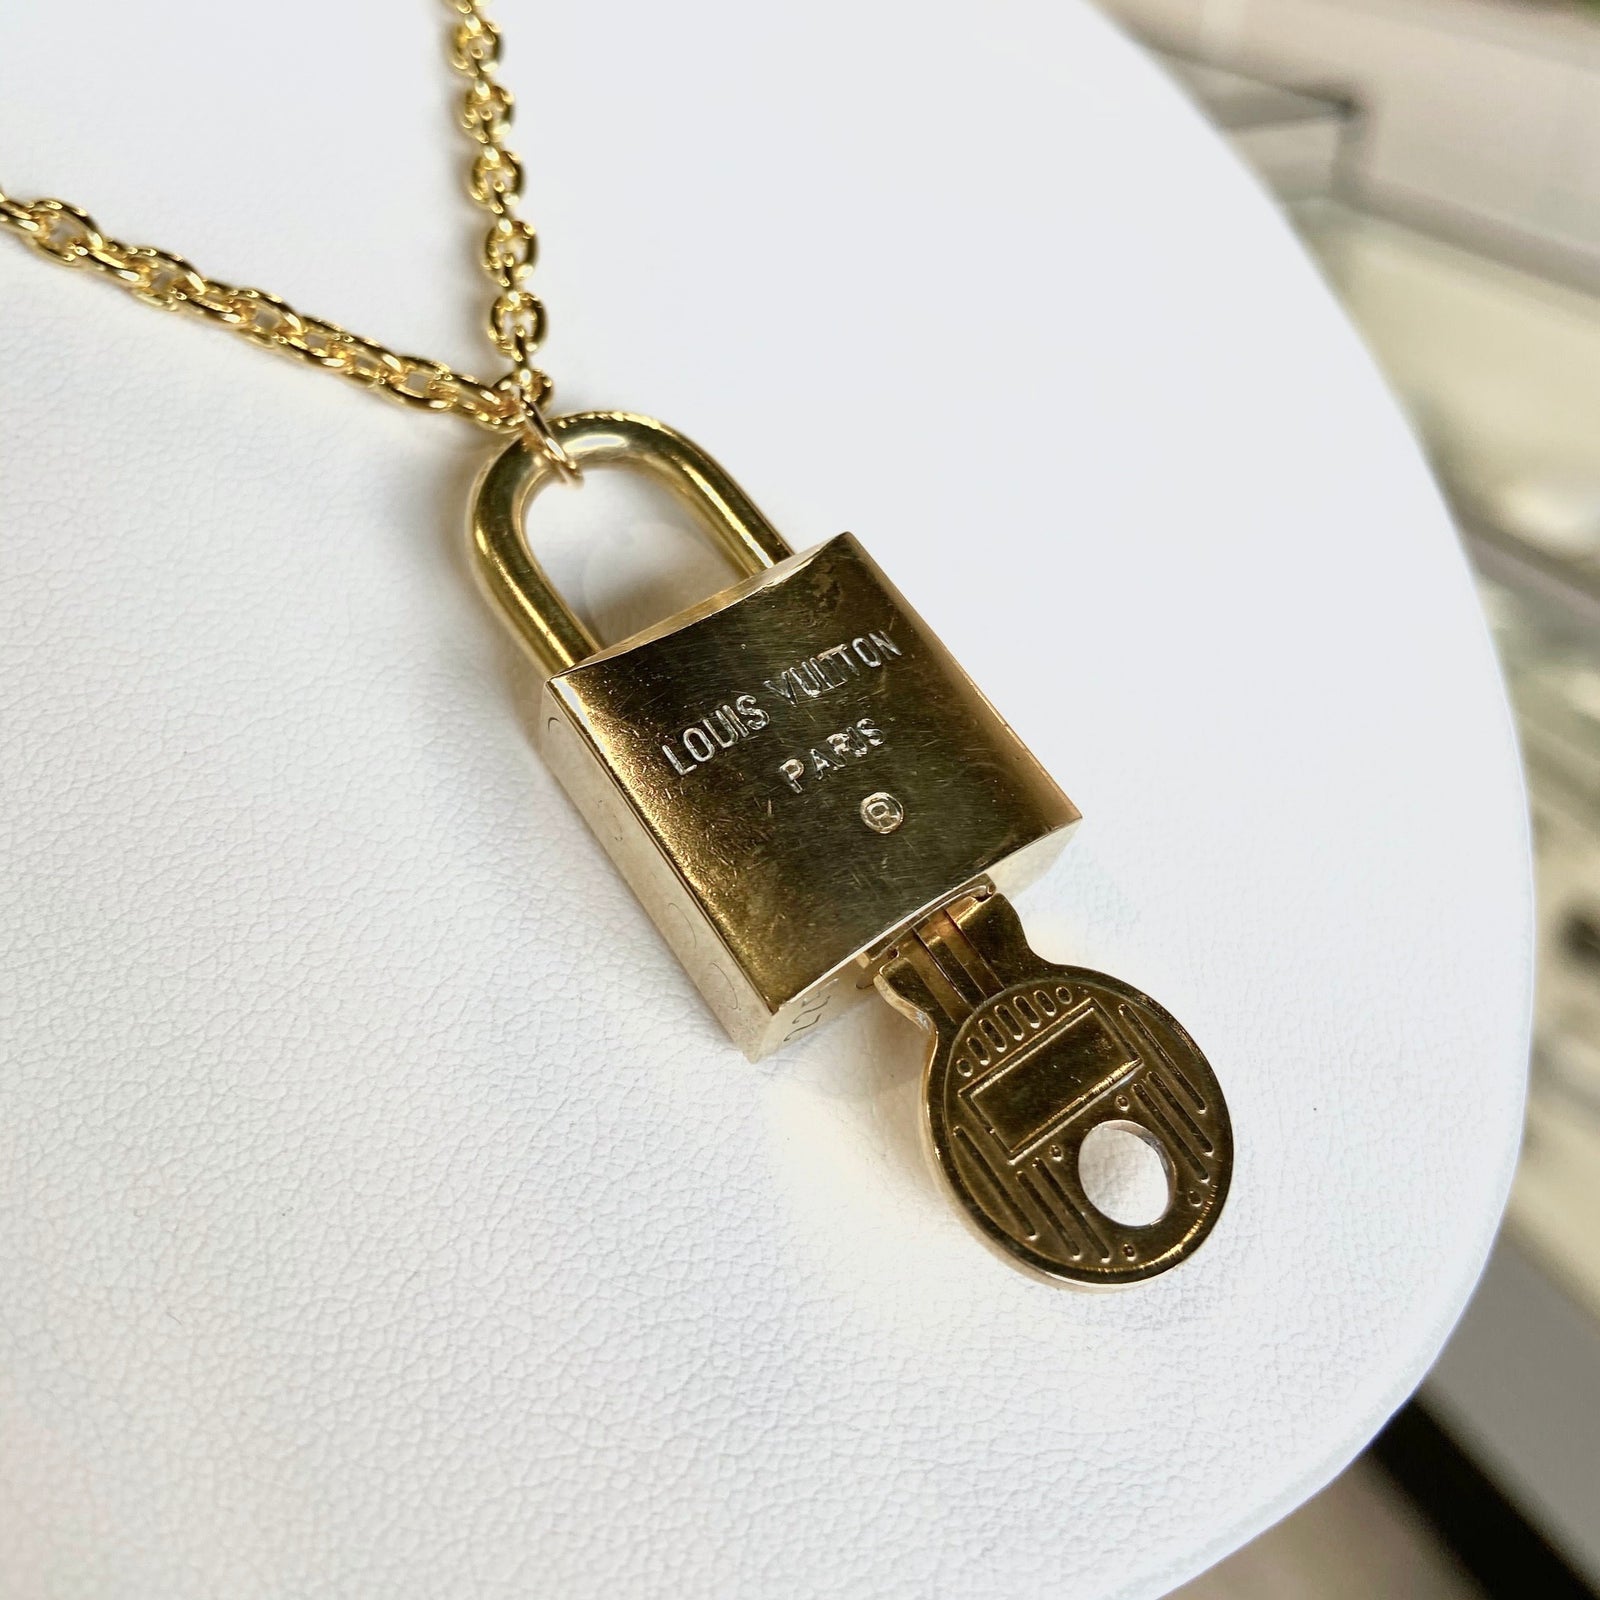 Louis Vuitton Goldtone and Black Crystal Key and Padlock Charm